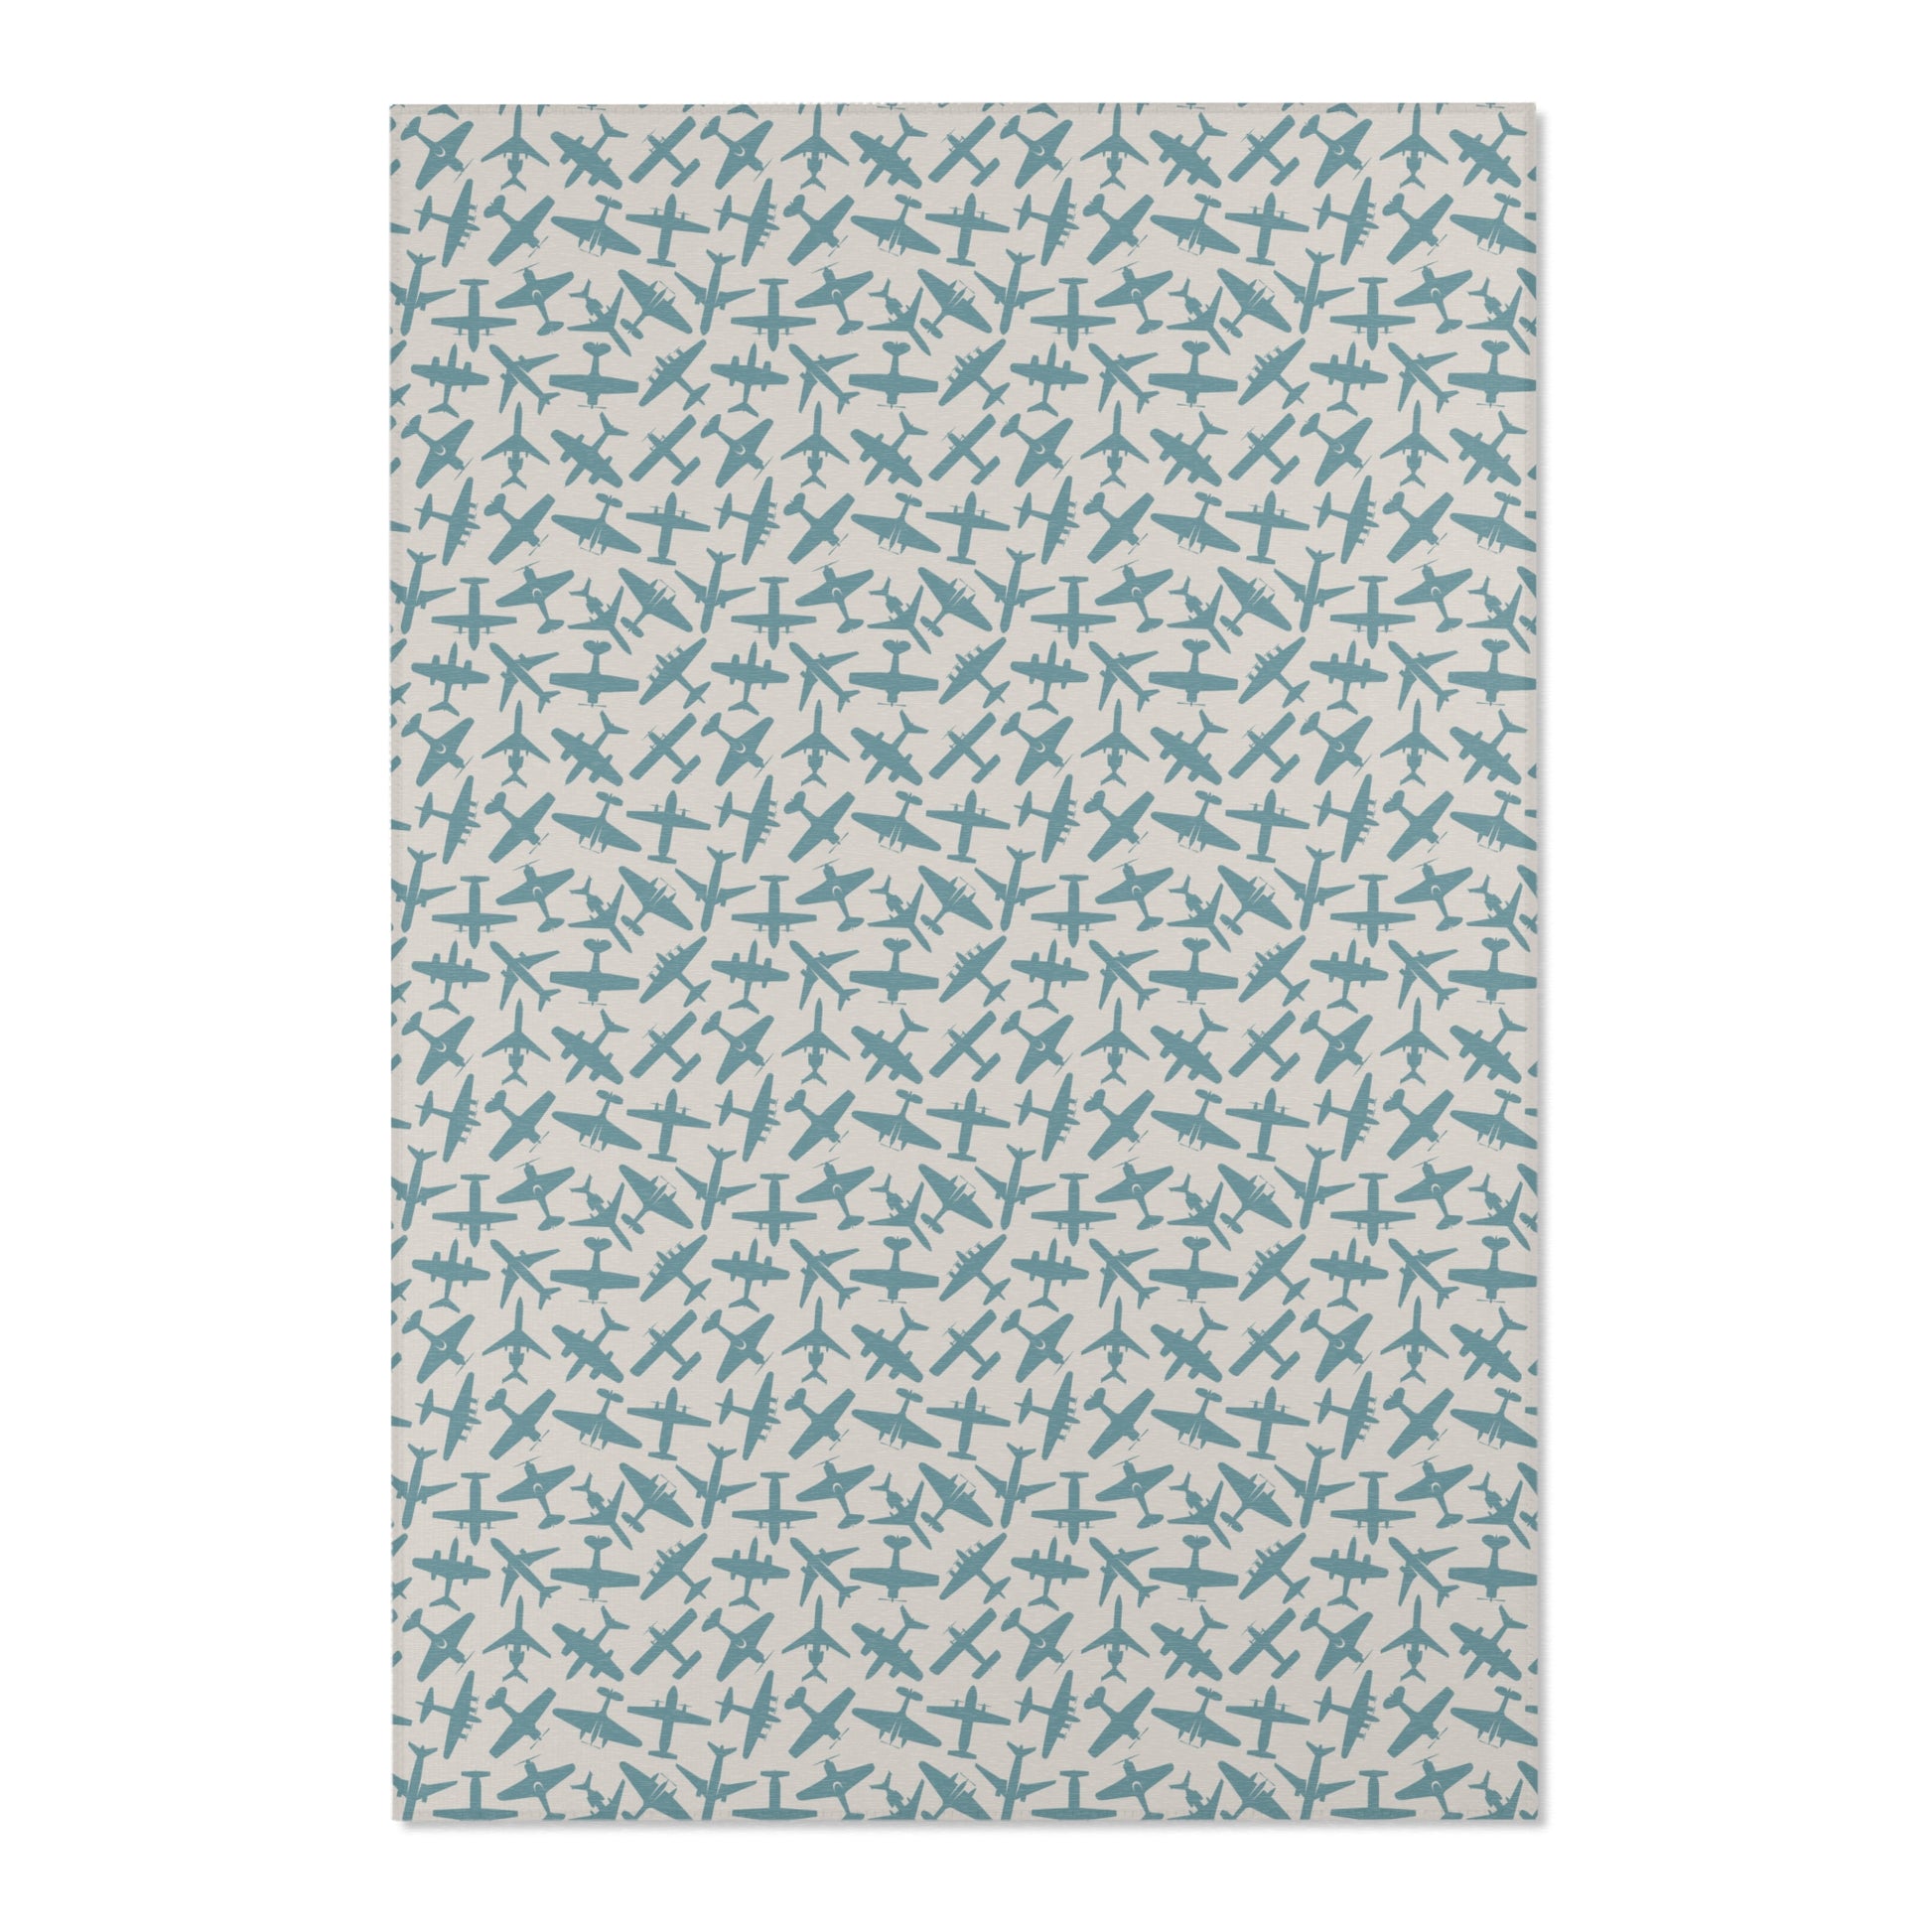 aviation merchandise, airplane patterned aviation area rug 2